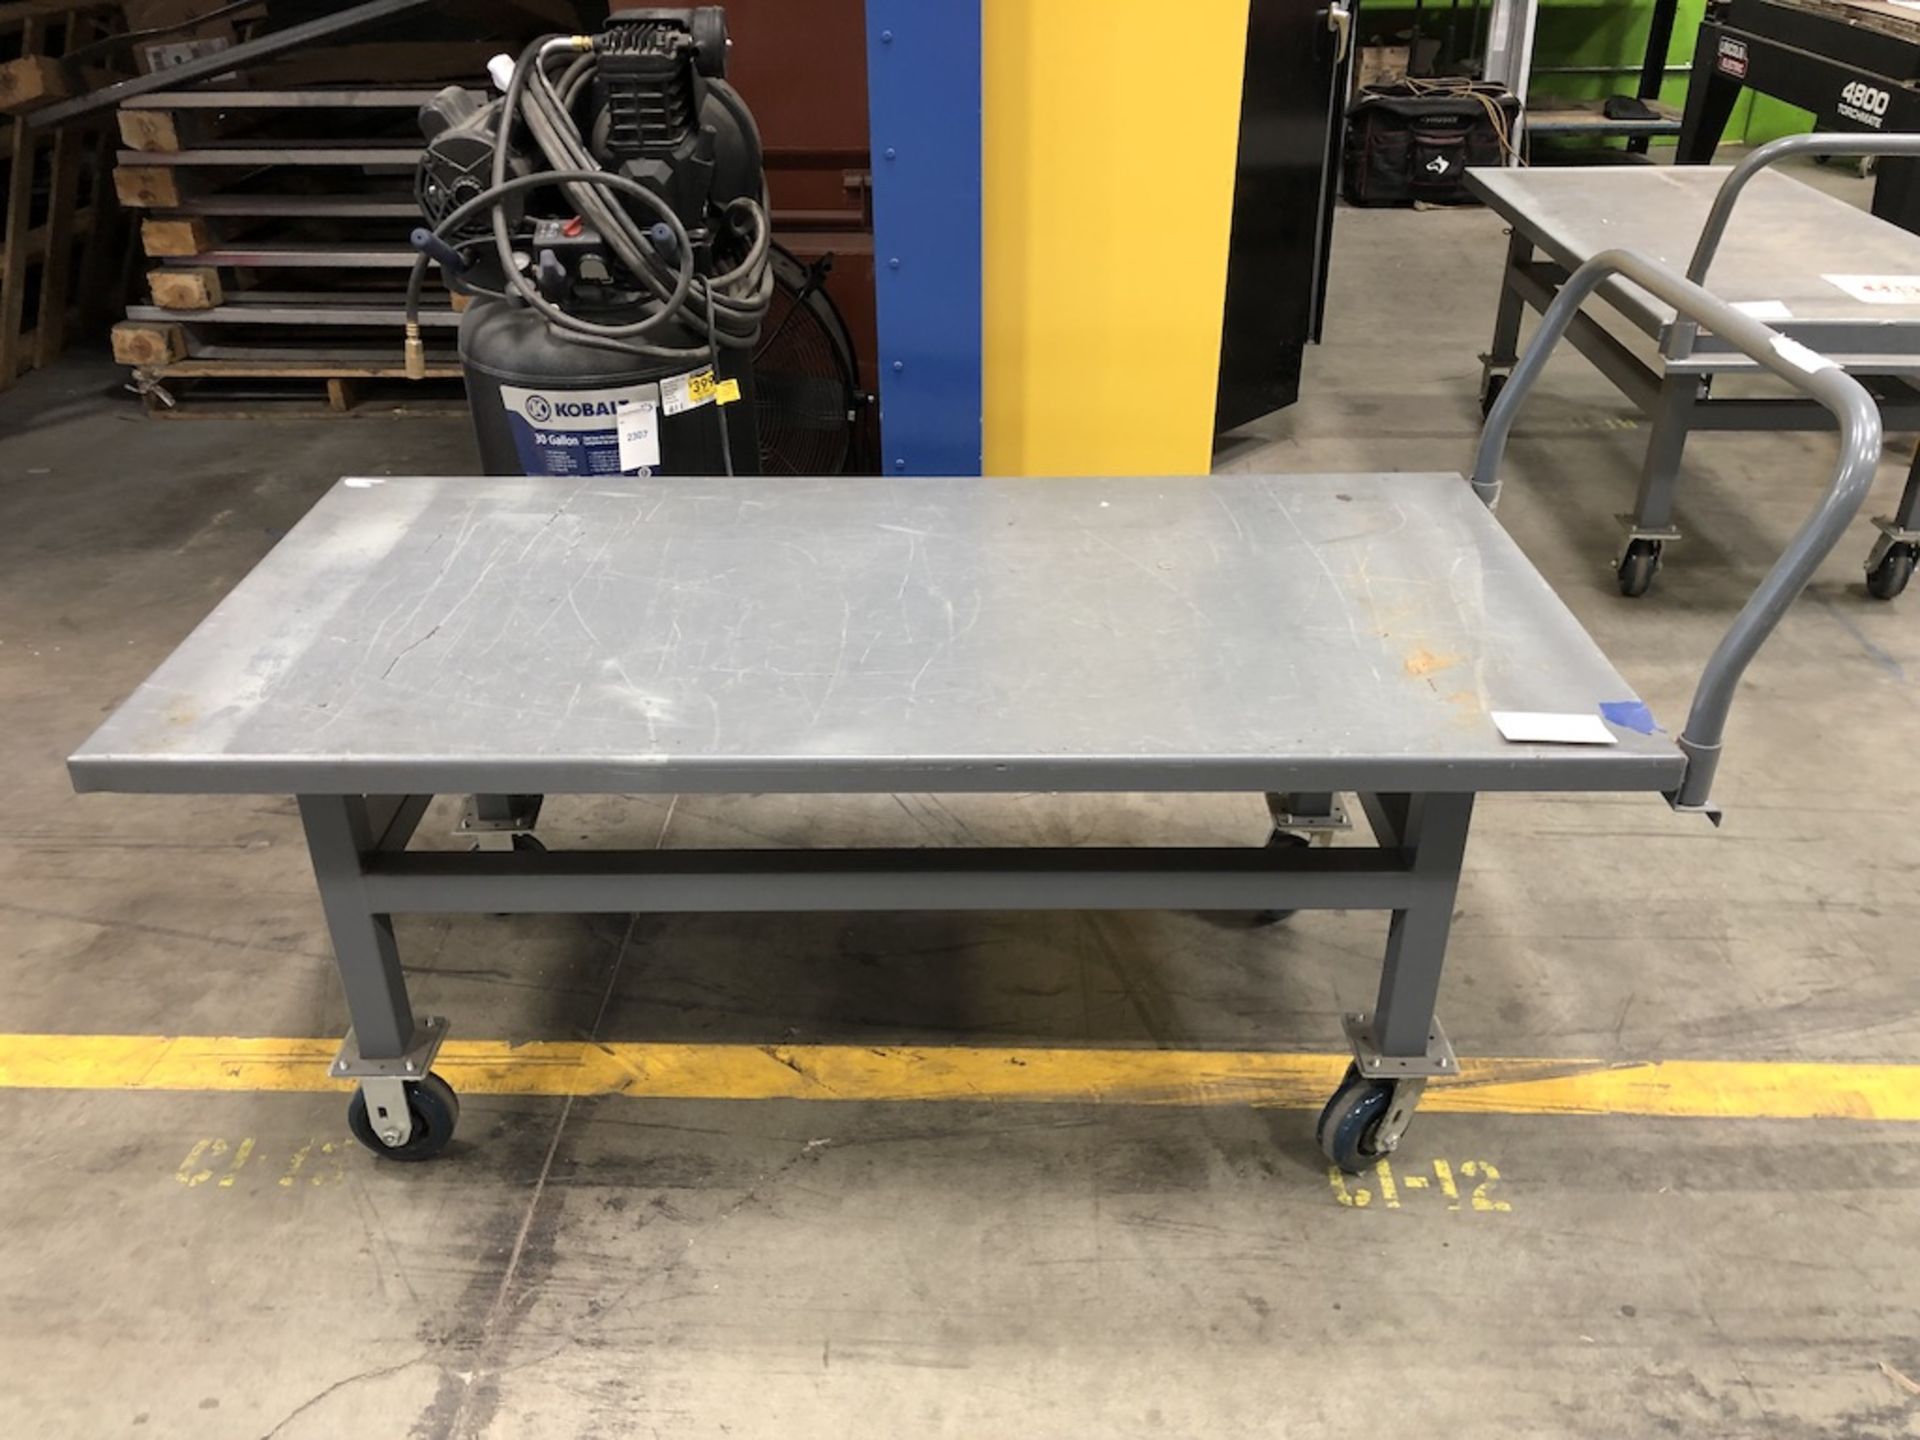 ULINE STEEL PLATFORM CART ( CONTENTS NOT INCLUDED ) 64IN L X 30 IN W X 37 IN H - Image 7 of 7